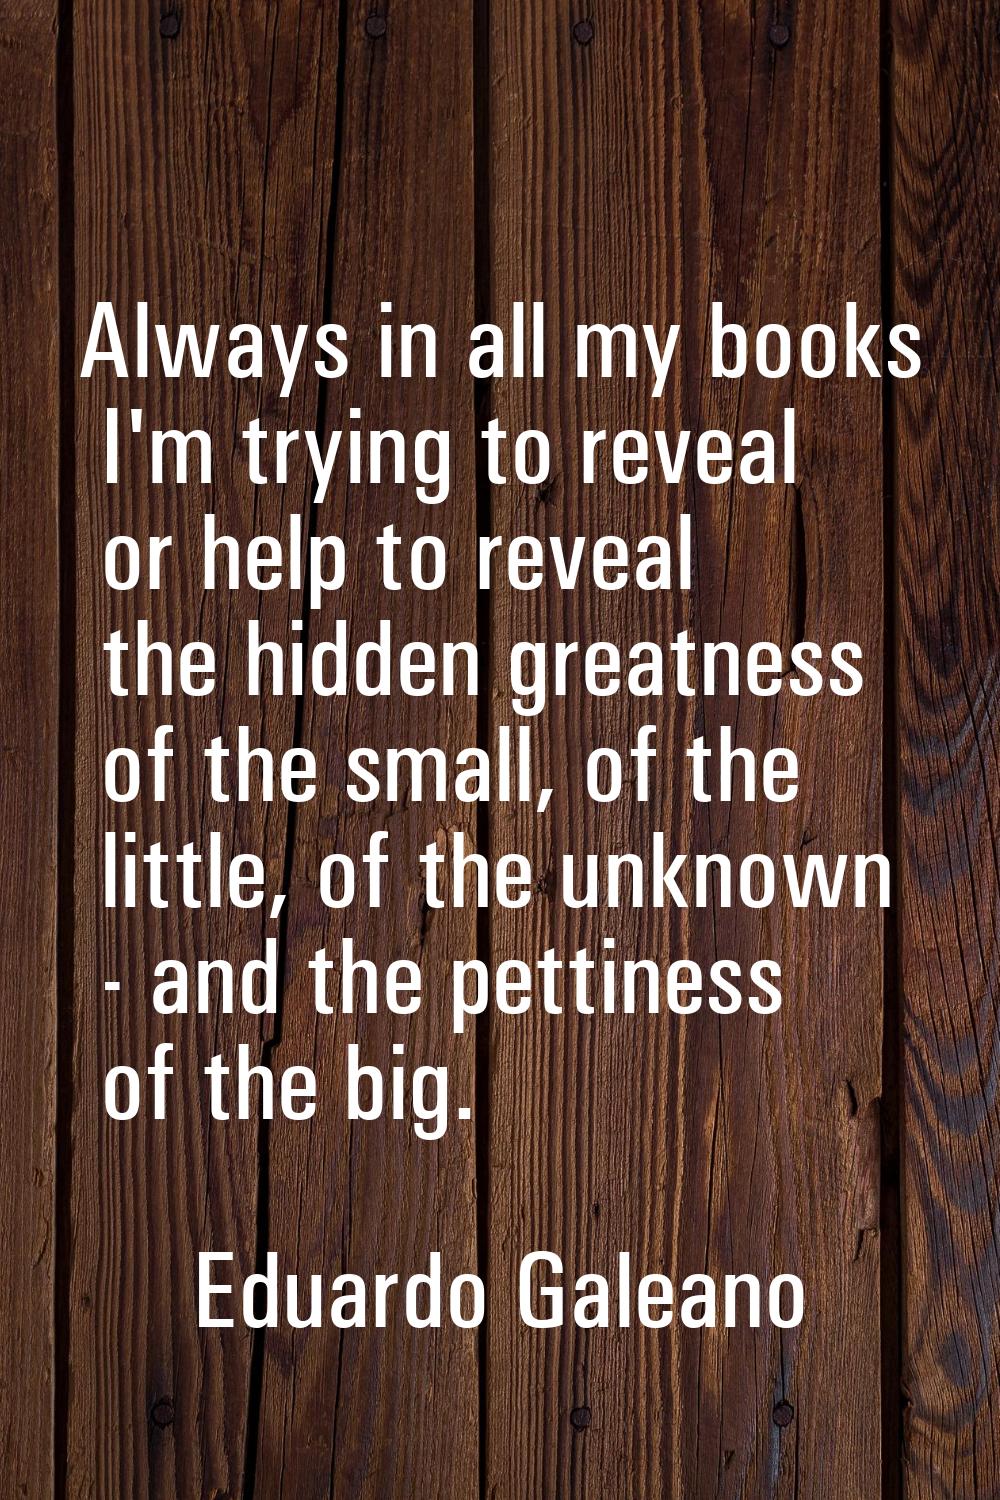 Always in all my books I'm trying to reveal or help to reveal the hidden greatness of the small, of